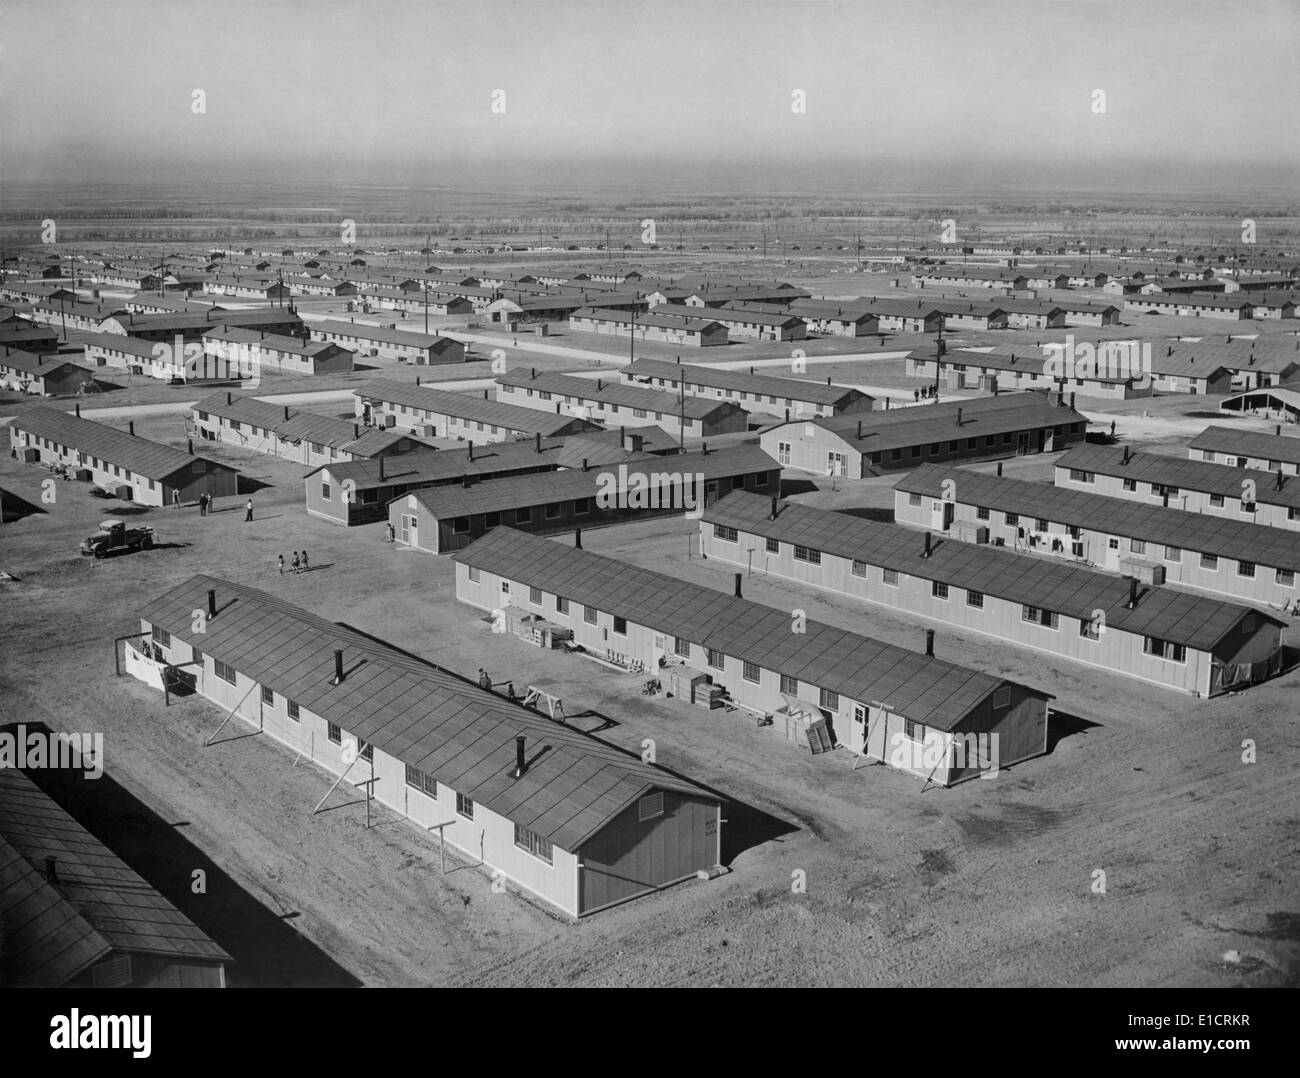 Granada War Relocation Center, the official name of a internment camp for Japanese Americans. During World War 2, the Colorado Stock Photo